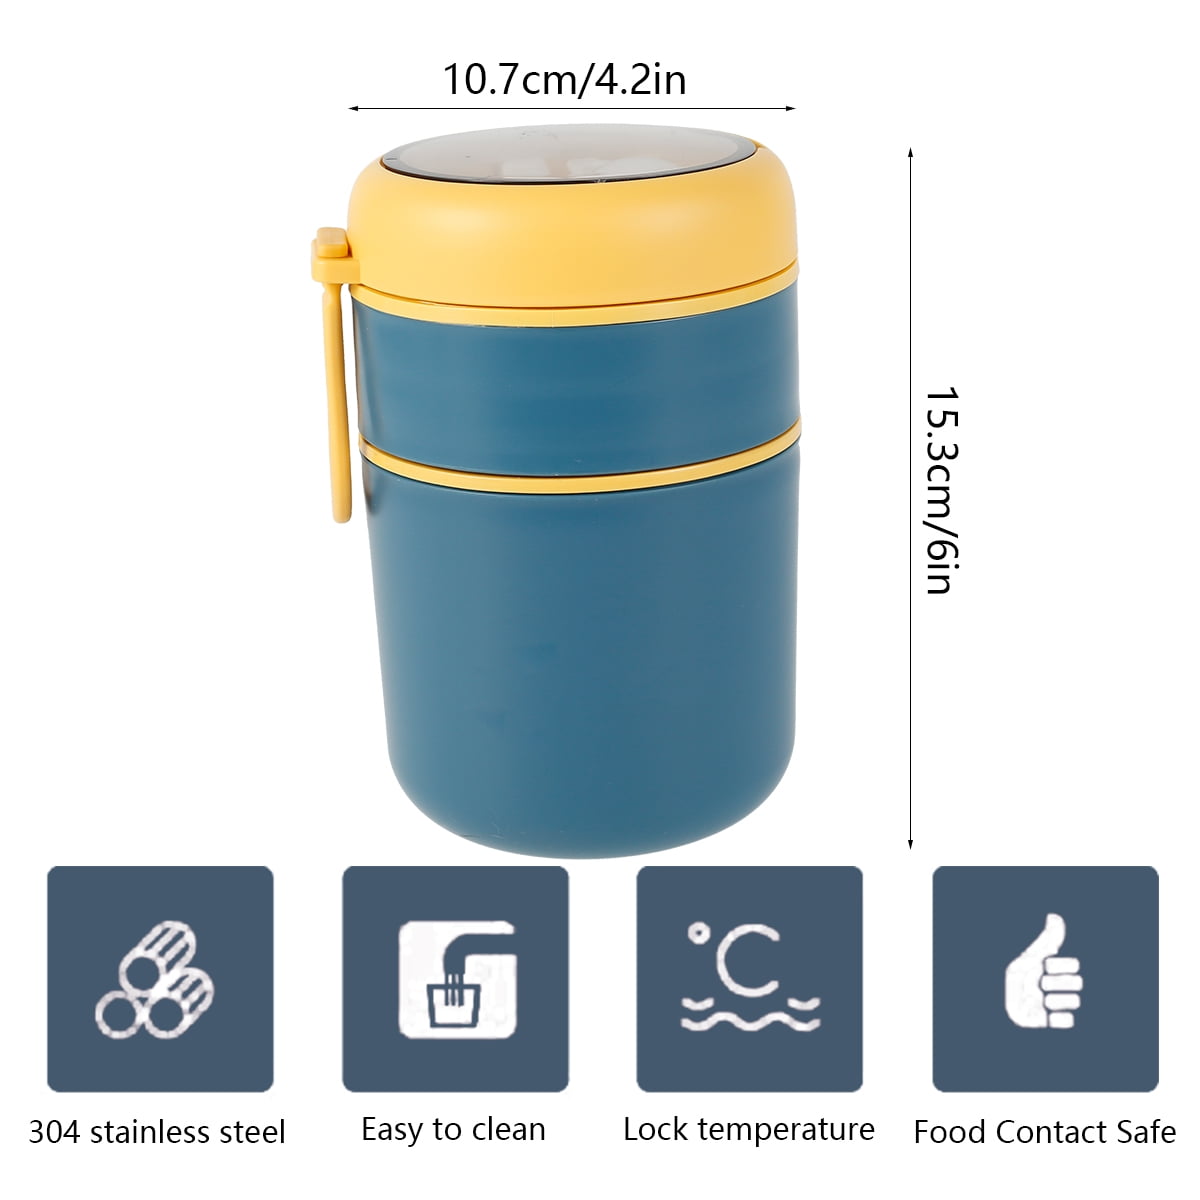 WWP Travel Beverage Container for Hot and Cold Drinks – Walking with Purpose